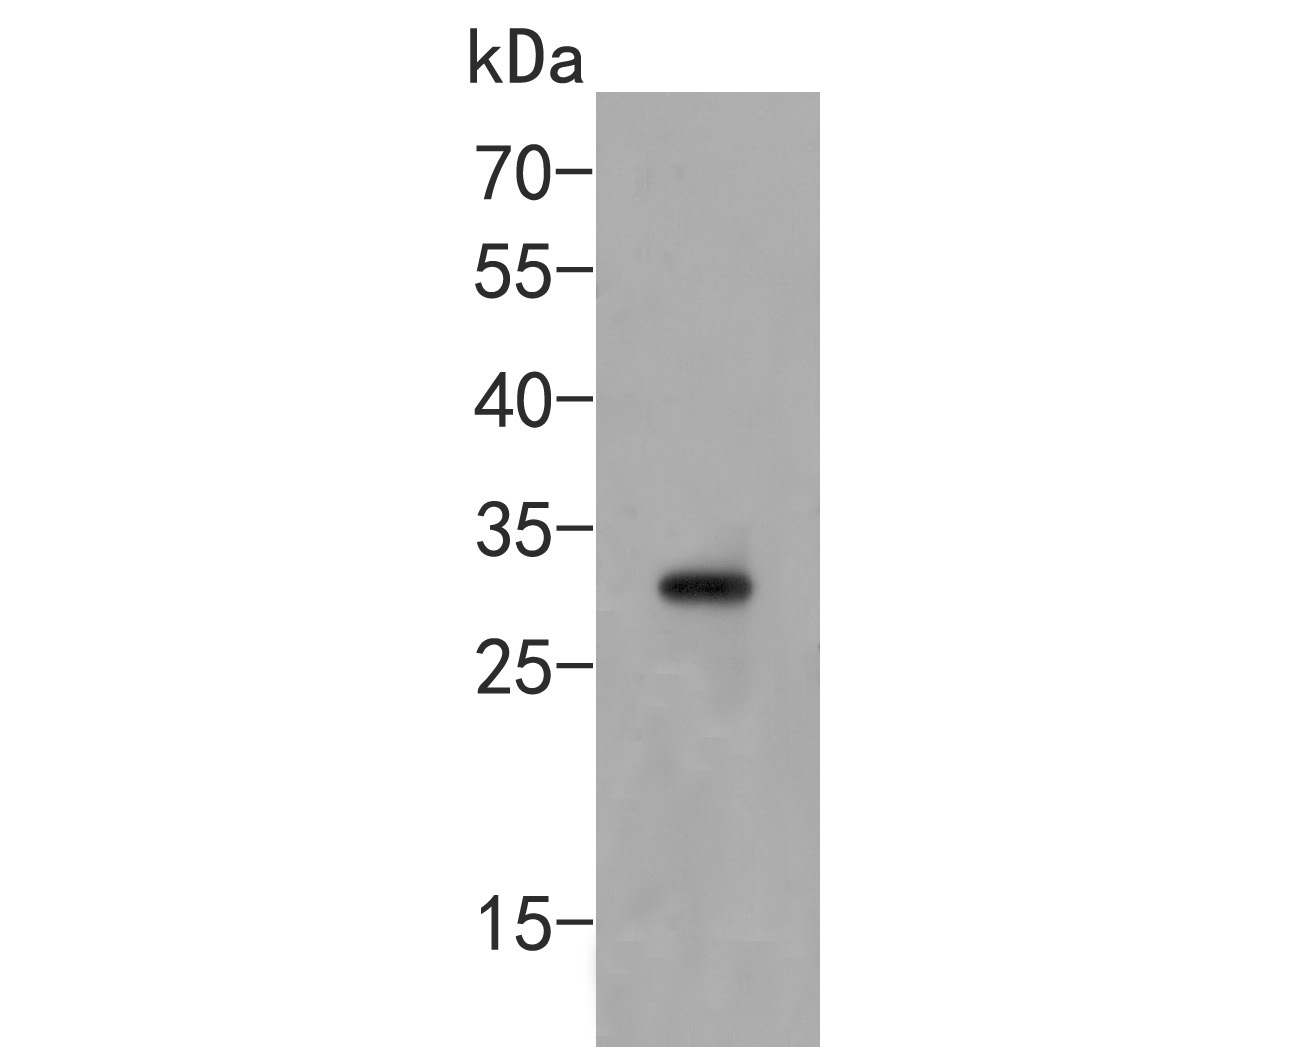 Western blot analysis of CLIC1 on mouse kidney tissue lysate. Proteins were transferred to a PVDF membrane and blocked with 5% BSA in PBS for 1 hour at room temperature. The primary antibody (ER2001-32, 1/500) was used in 5% BSA at room temperature for 2 hours. Goat Anti-Rabbit IgG - HRP Secondary Antibody (HA1001) at 1:5,000 dilution was used for 1 hour at room temperature.